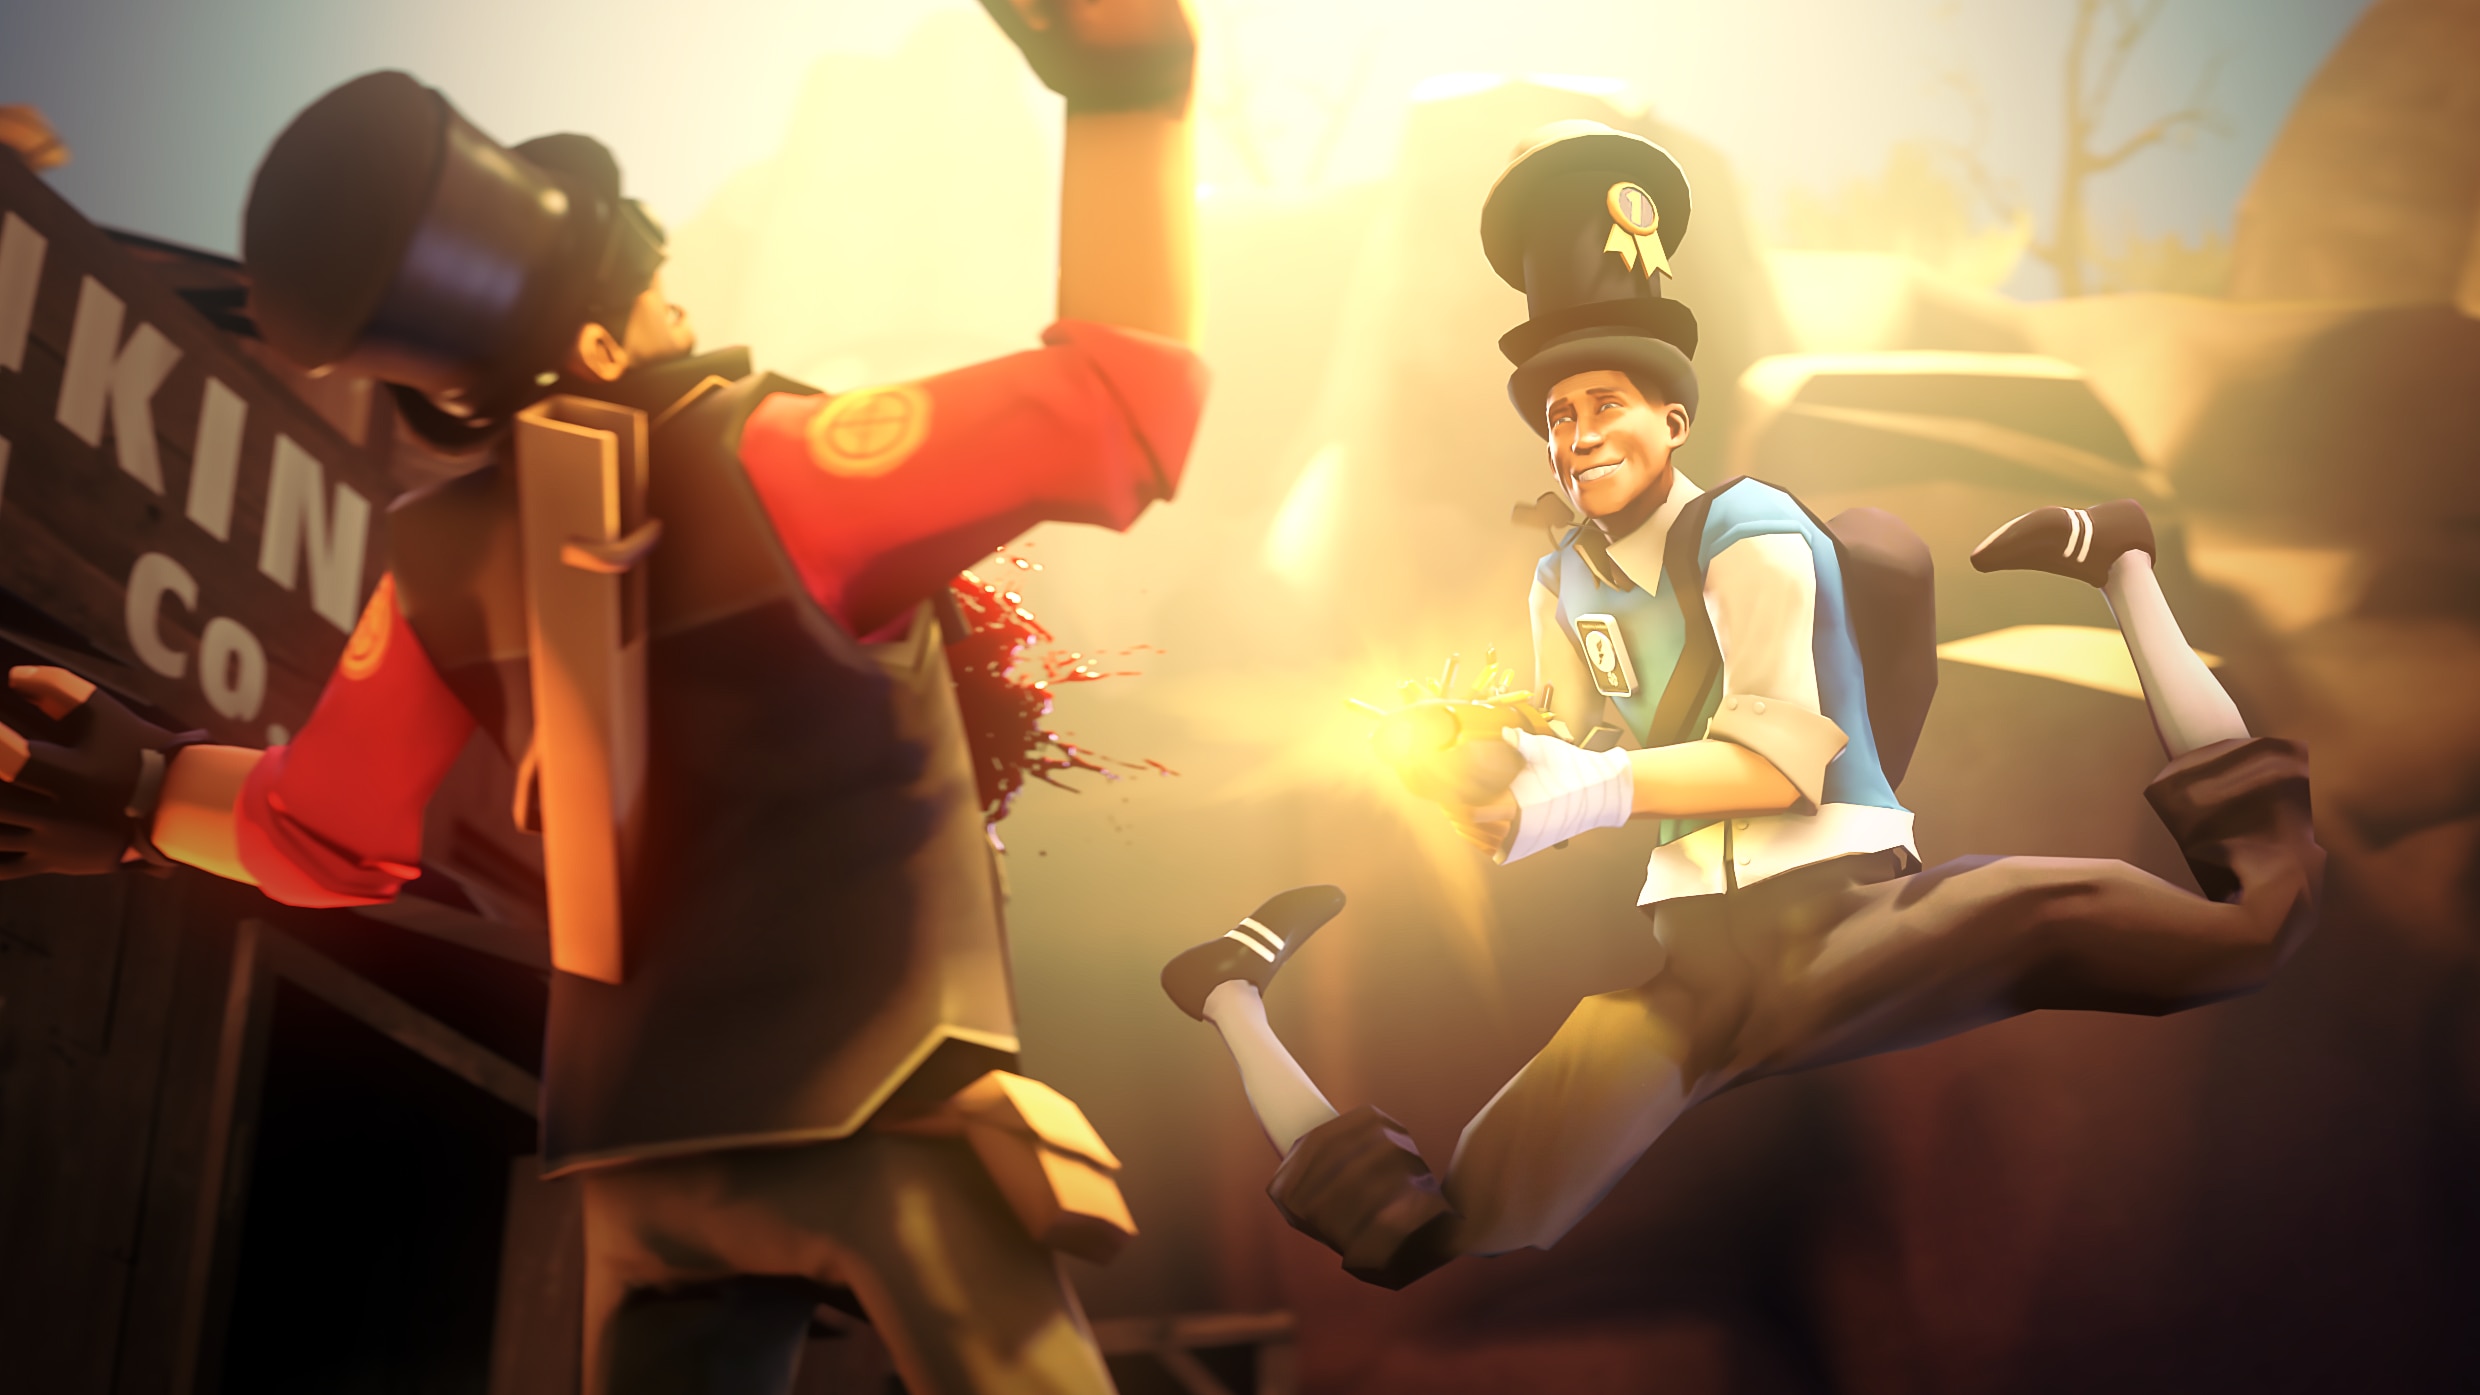 2Fort Timepiece! TF2 + a Hat in Time crossover SFM piece